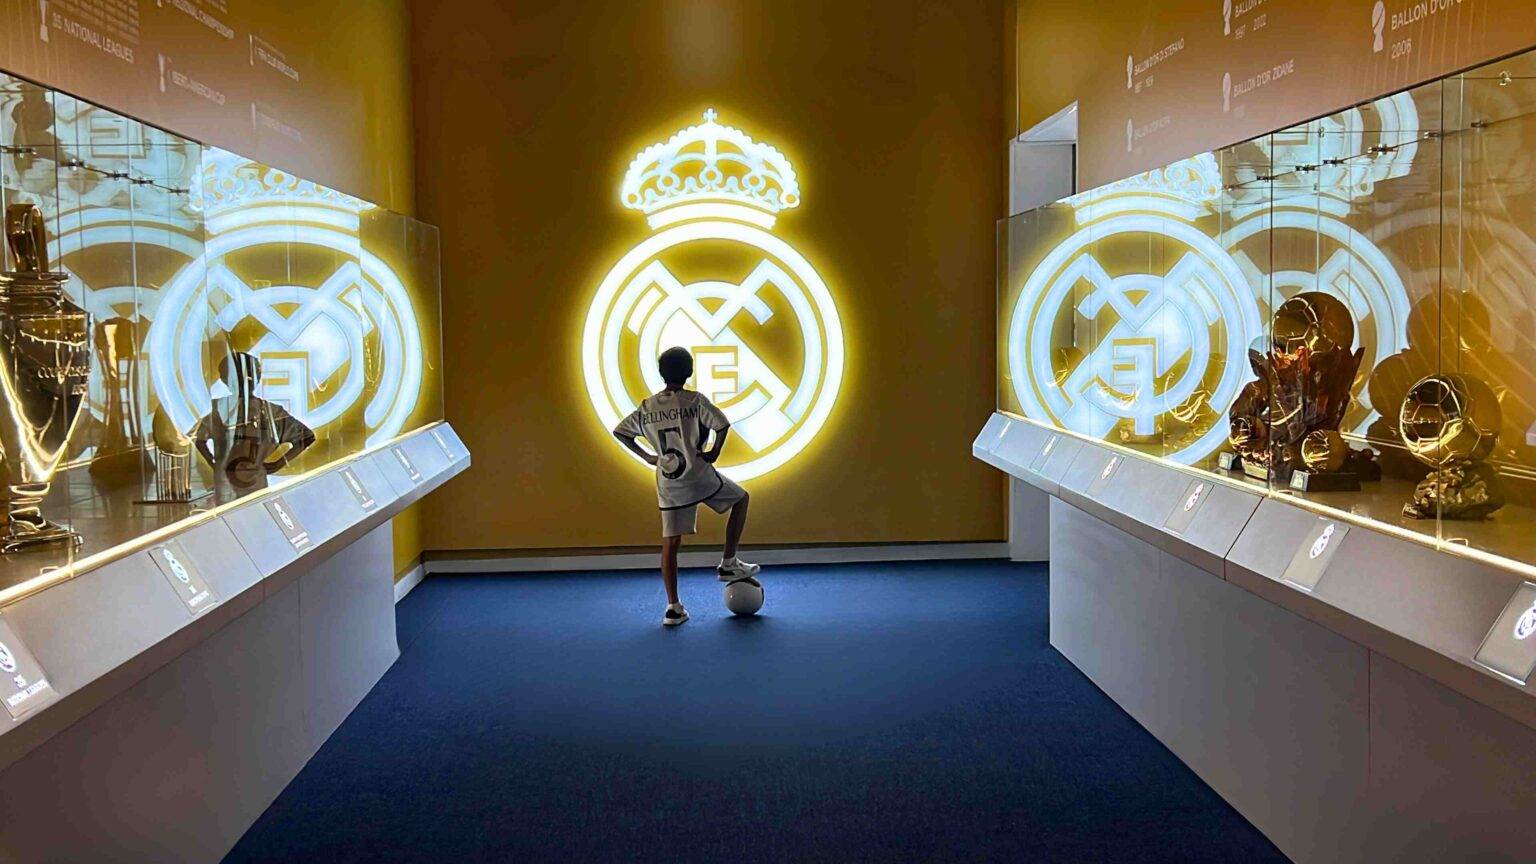 Today is the official opening day of Real Madrid World – Sports – Football